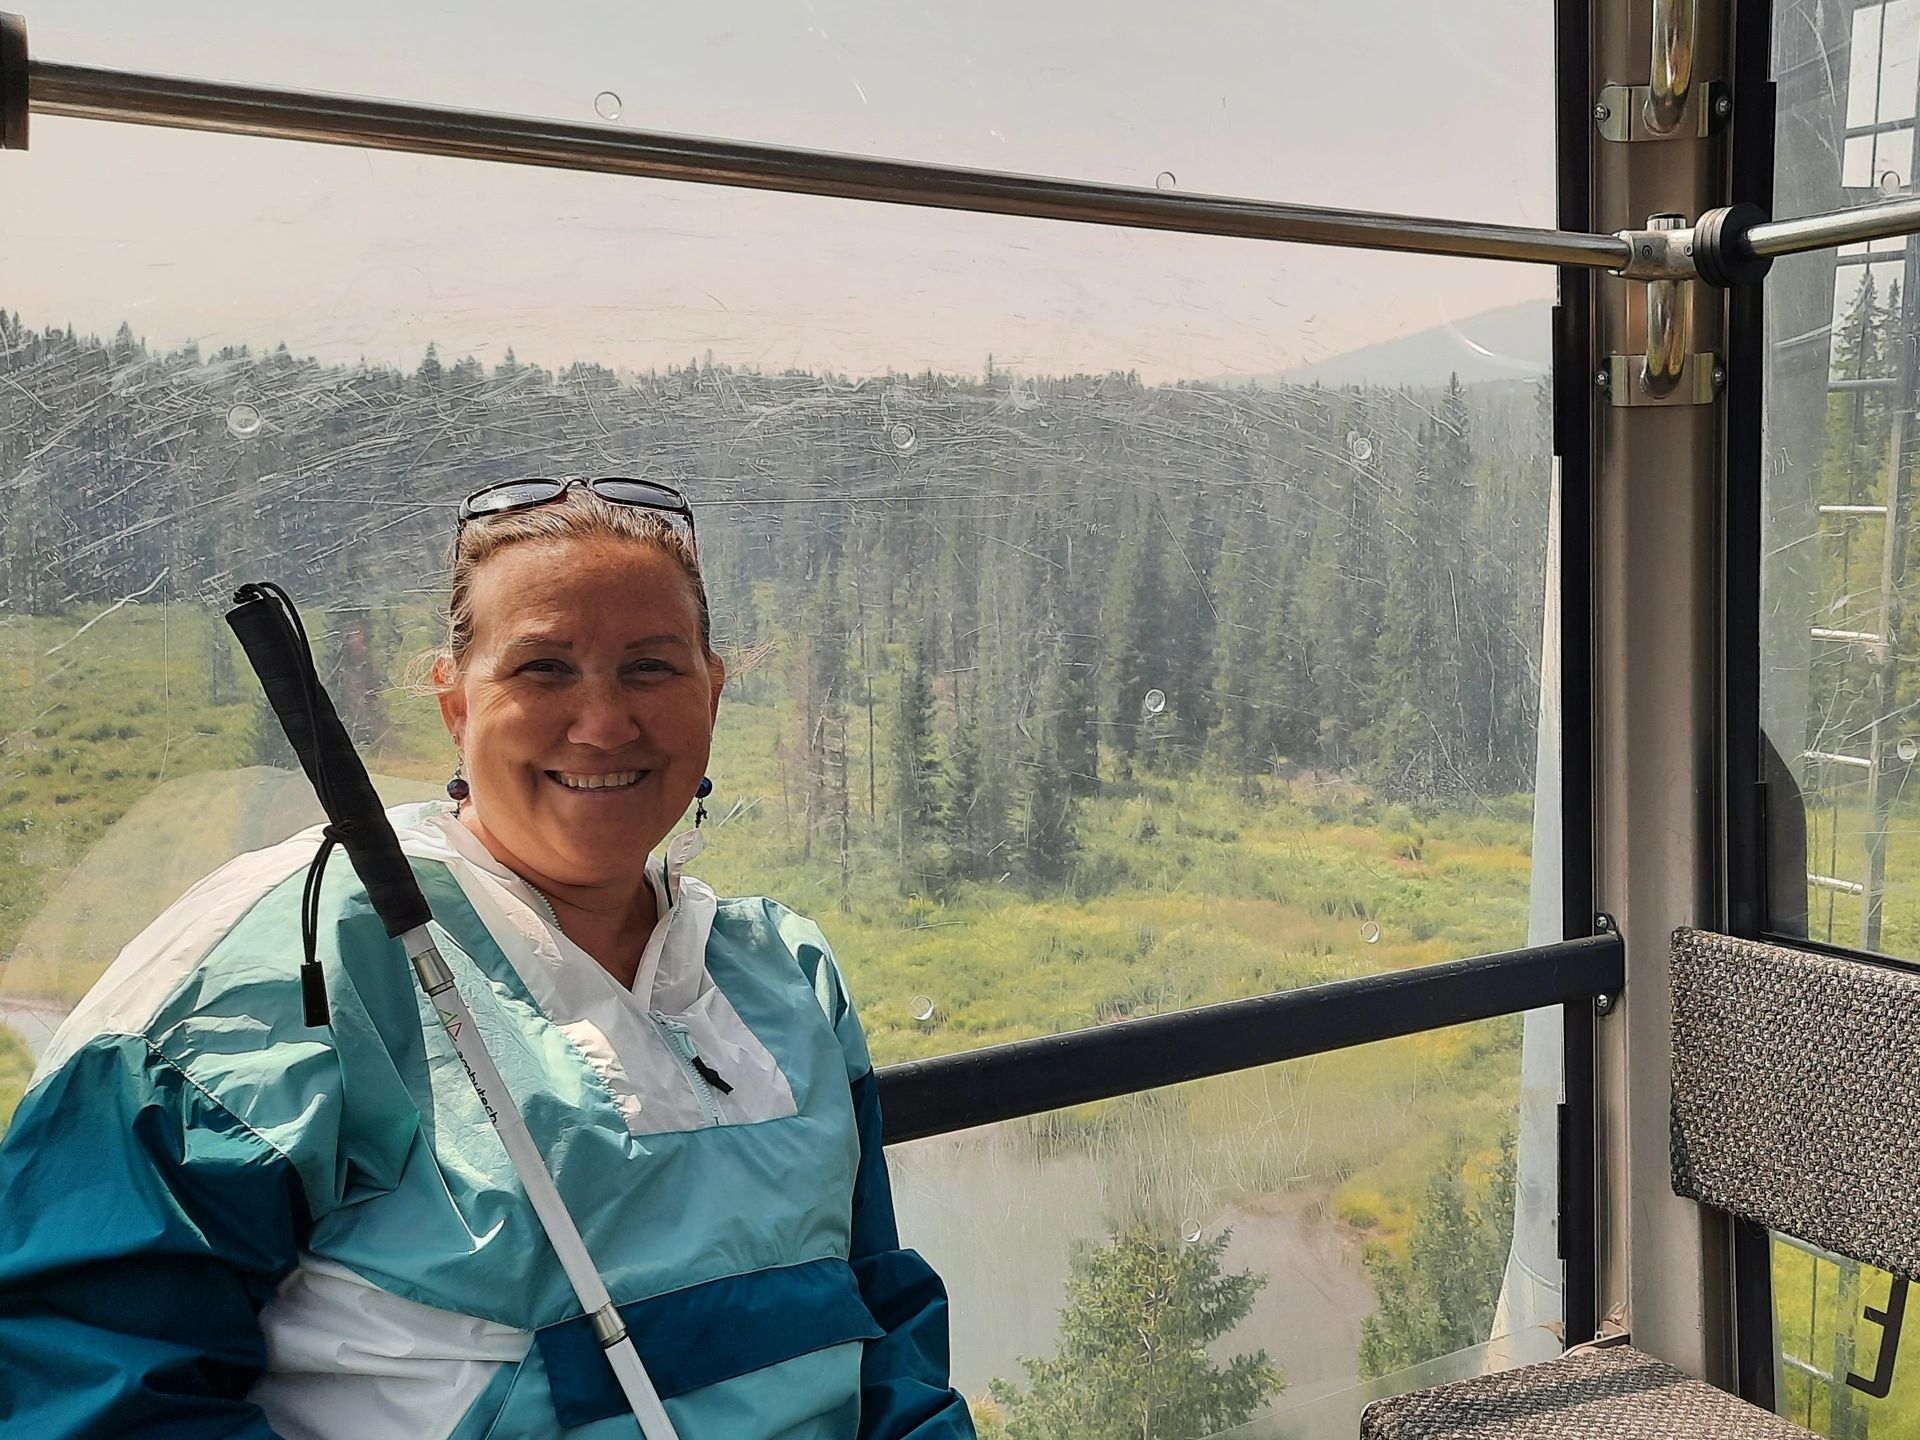 Me with my white cane riding the gondola at Winter Park Ski Resort, CO, in the fall.